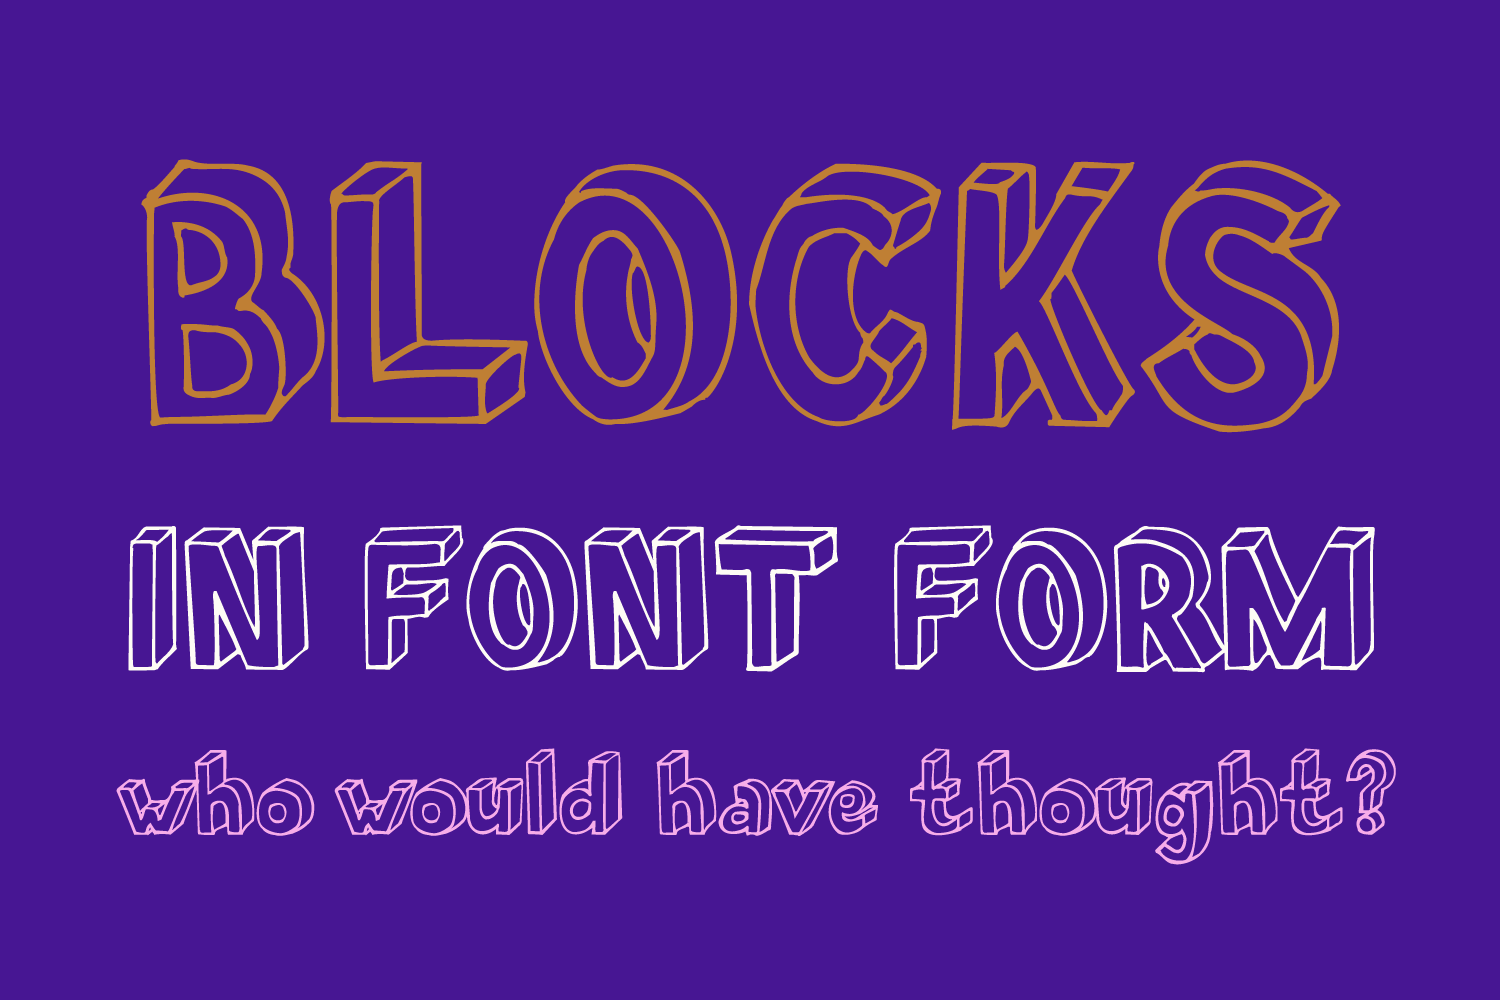 Blokparty Cheerful Display Font By Craft N Cuts Thehungryjpeg Com